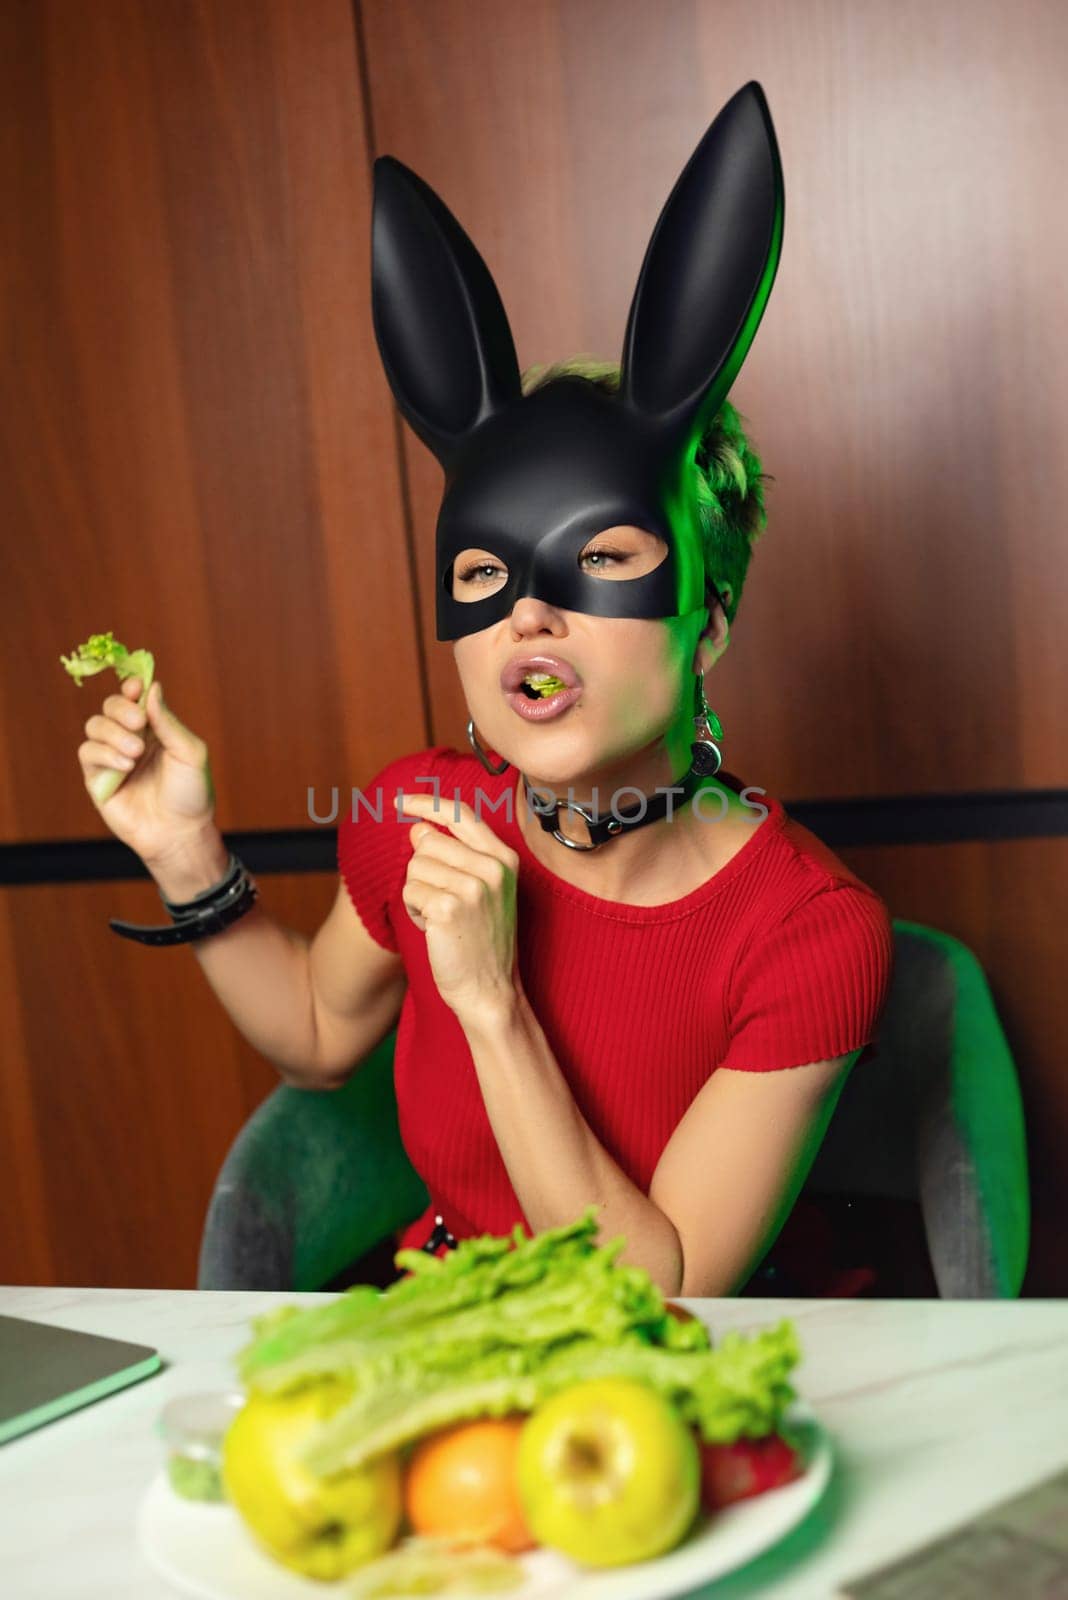 A beautiful girl in a bdsm rabbit mask and a bright red dress eats lettuce leaves promoting a healthy lifestyle and vegetarianism by Rotozey